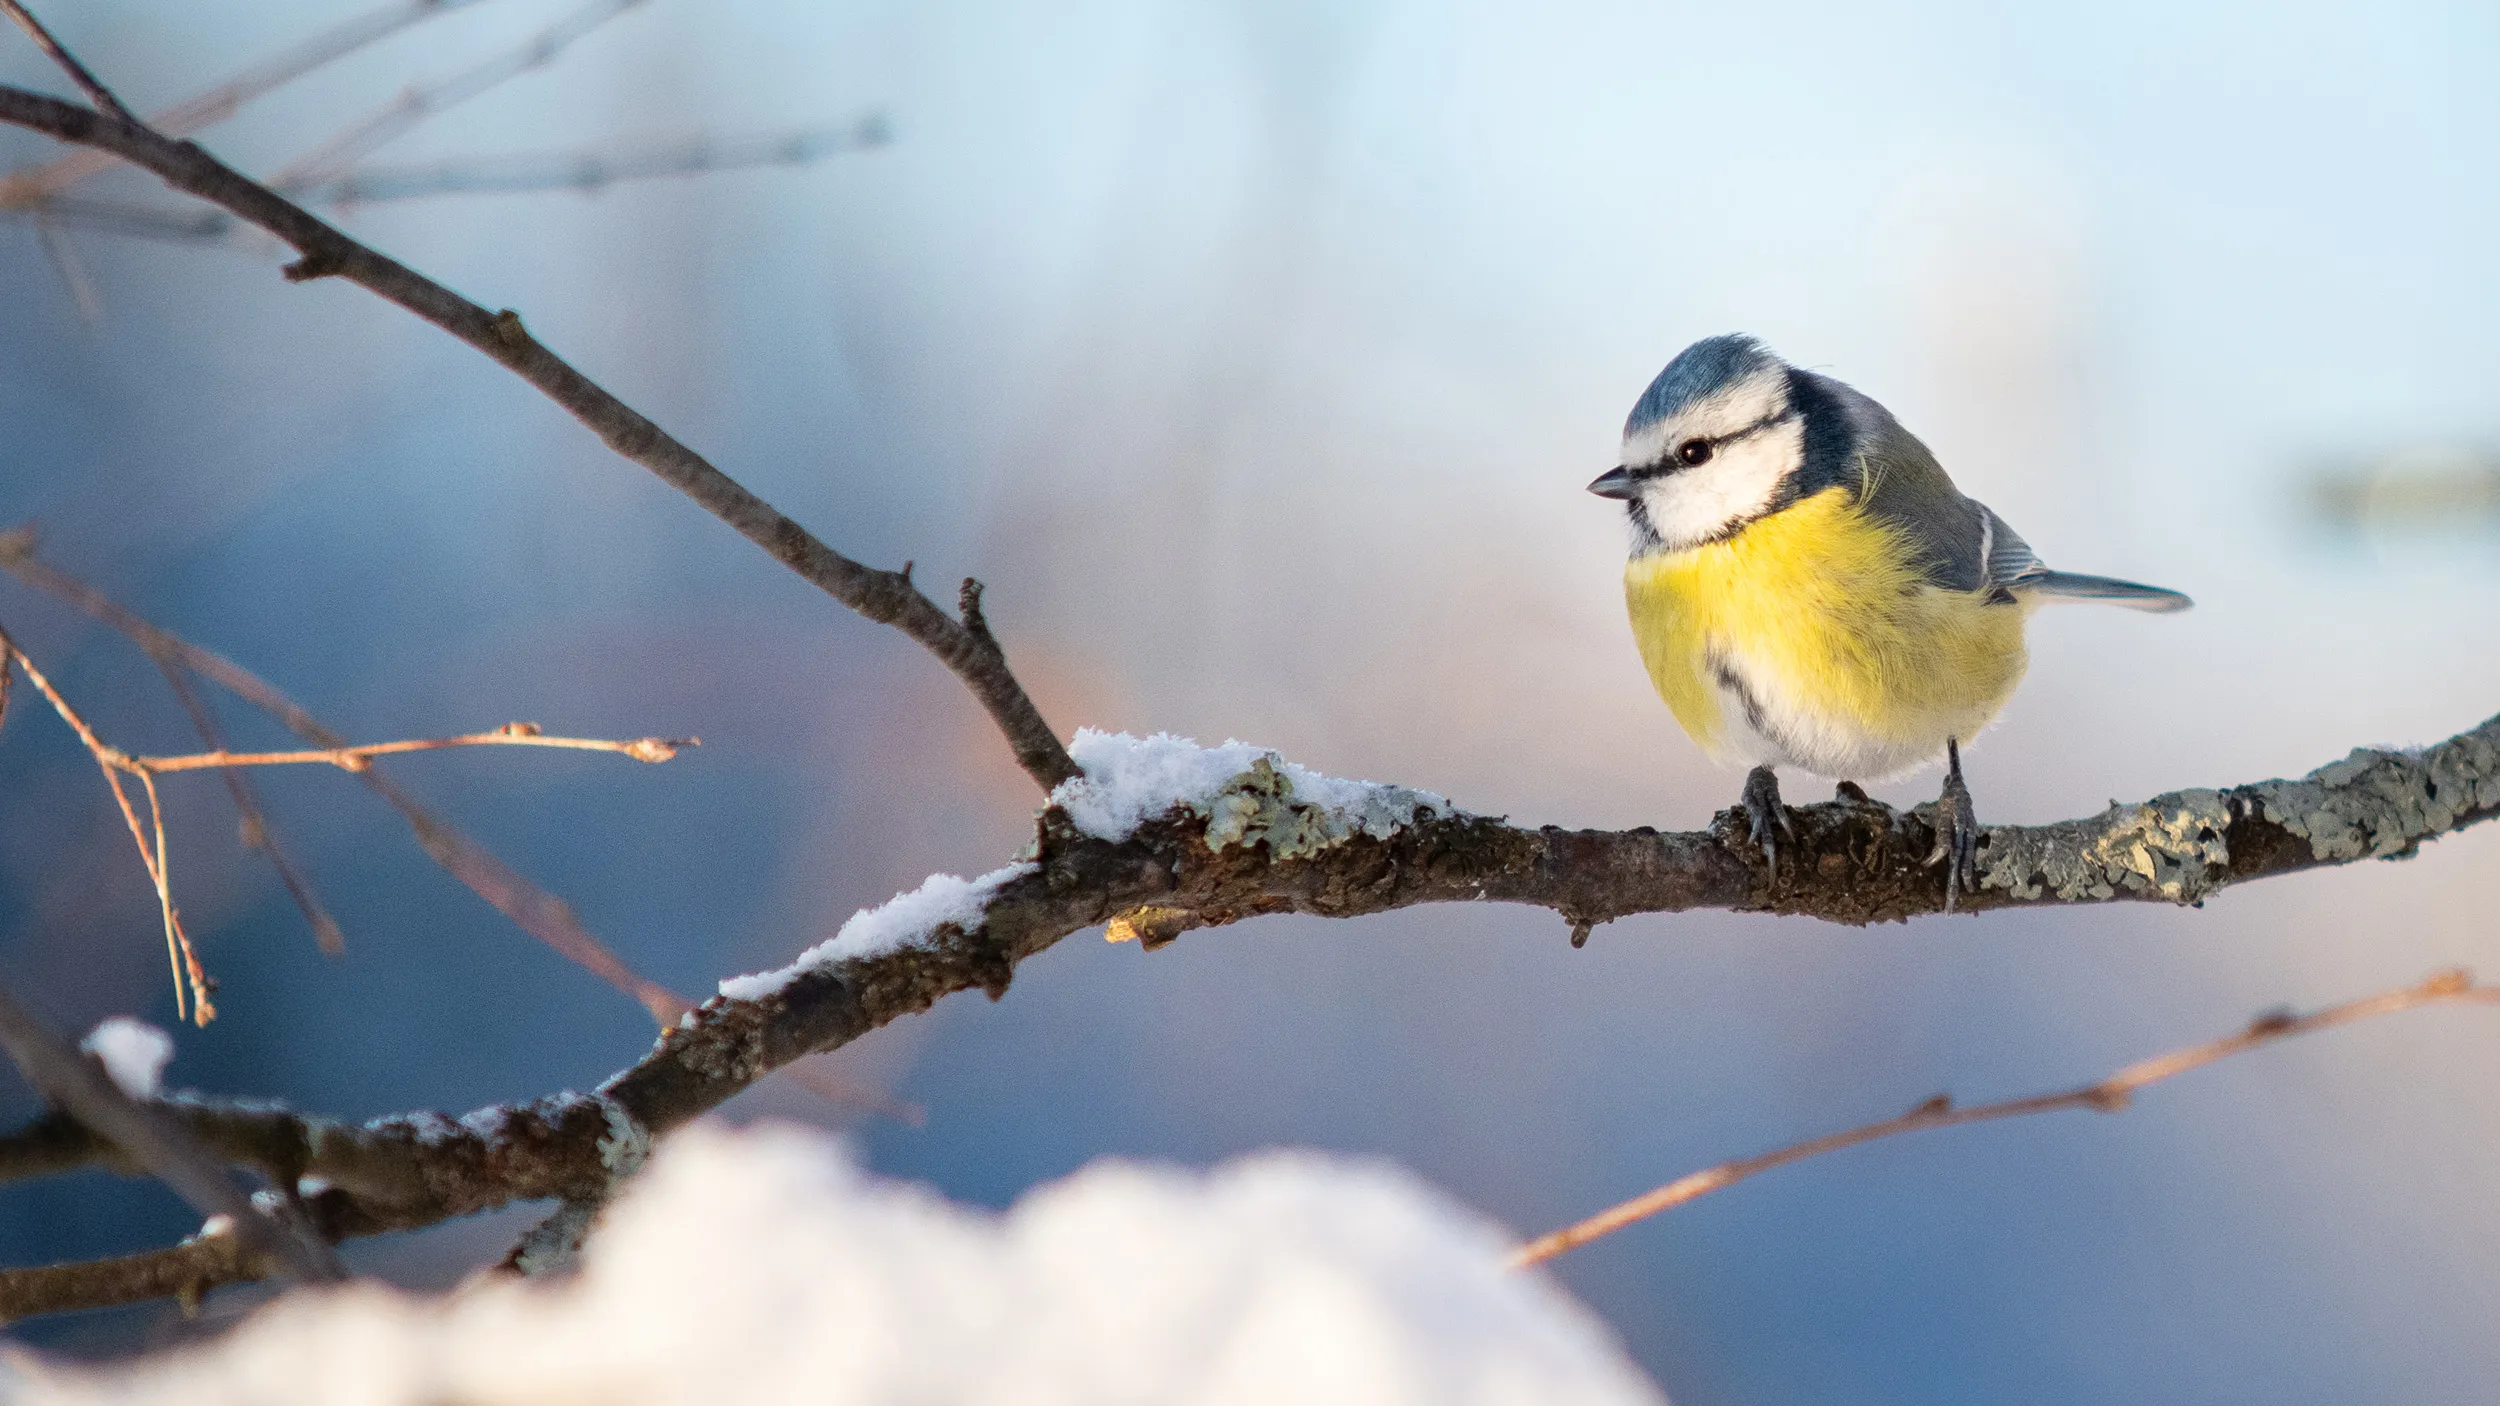 A Blue Tit perched on a branch slightly covered in snow, in the winter.